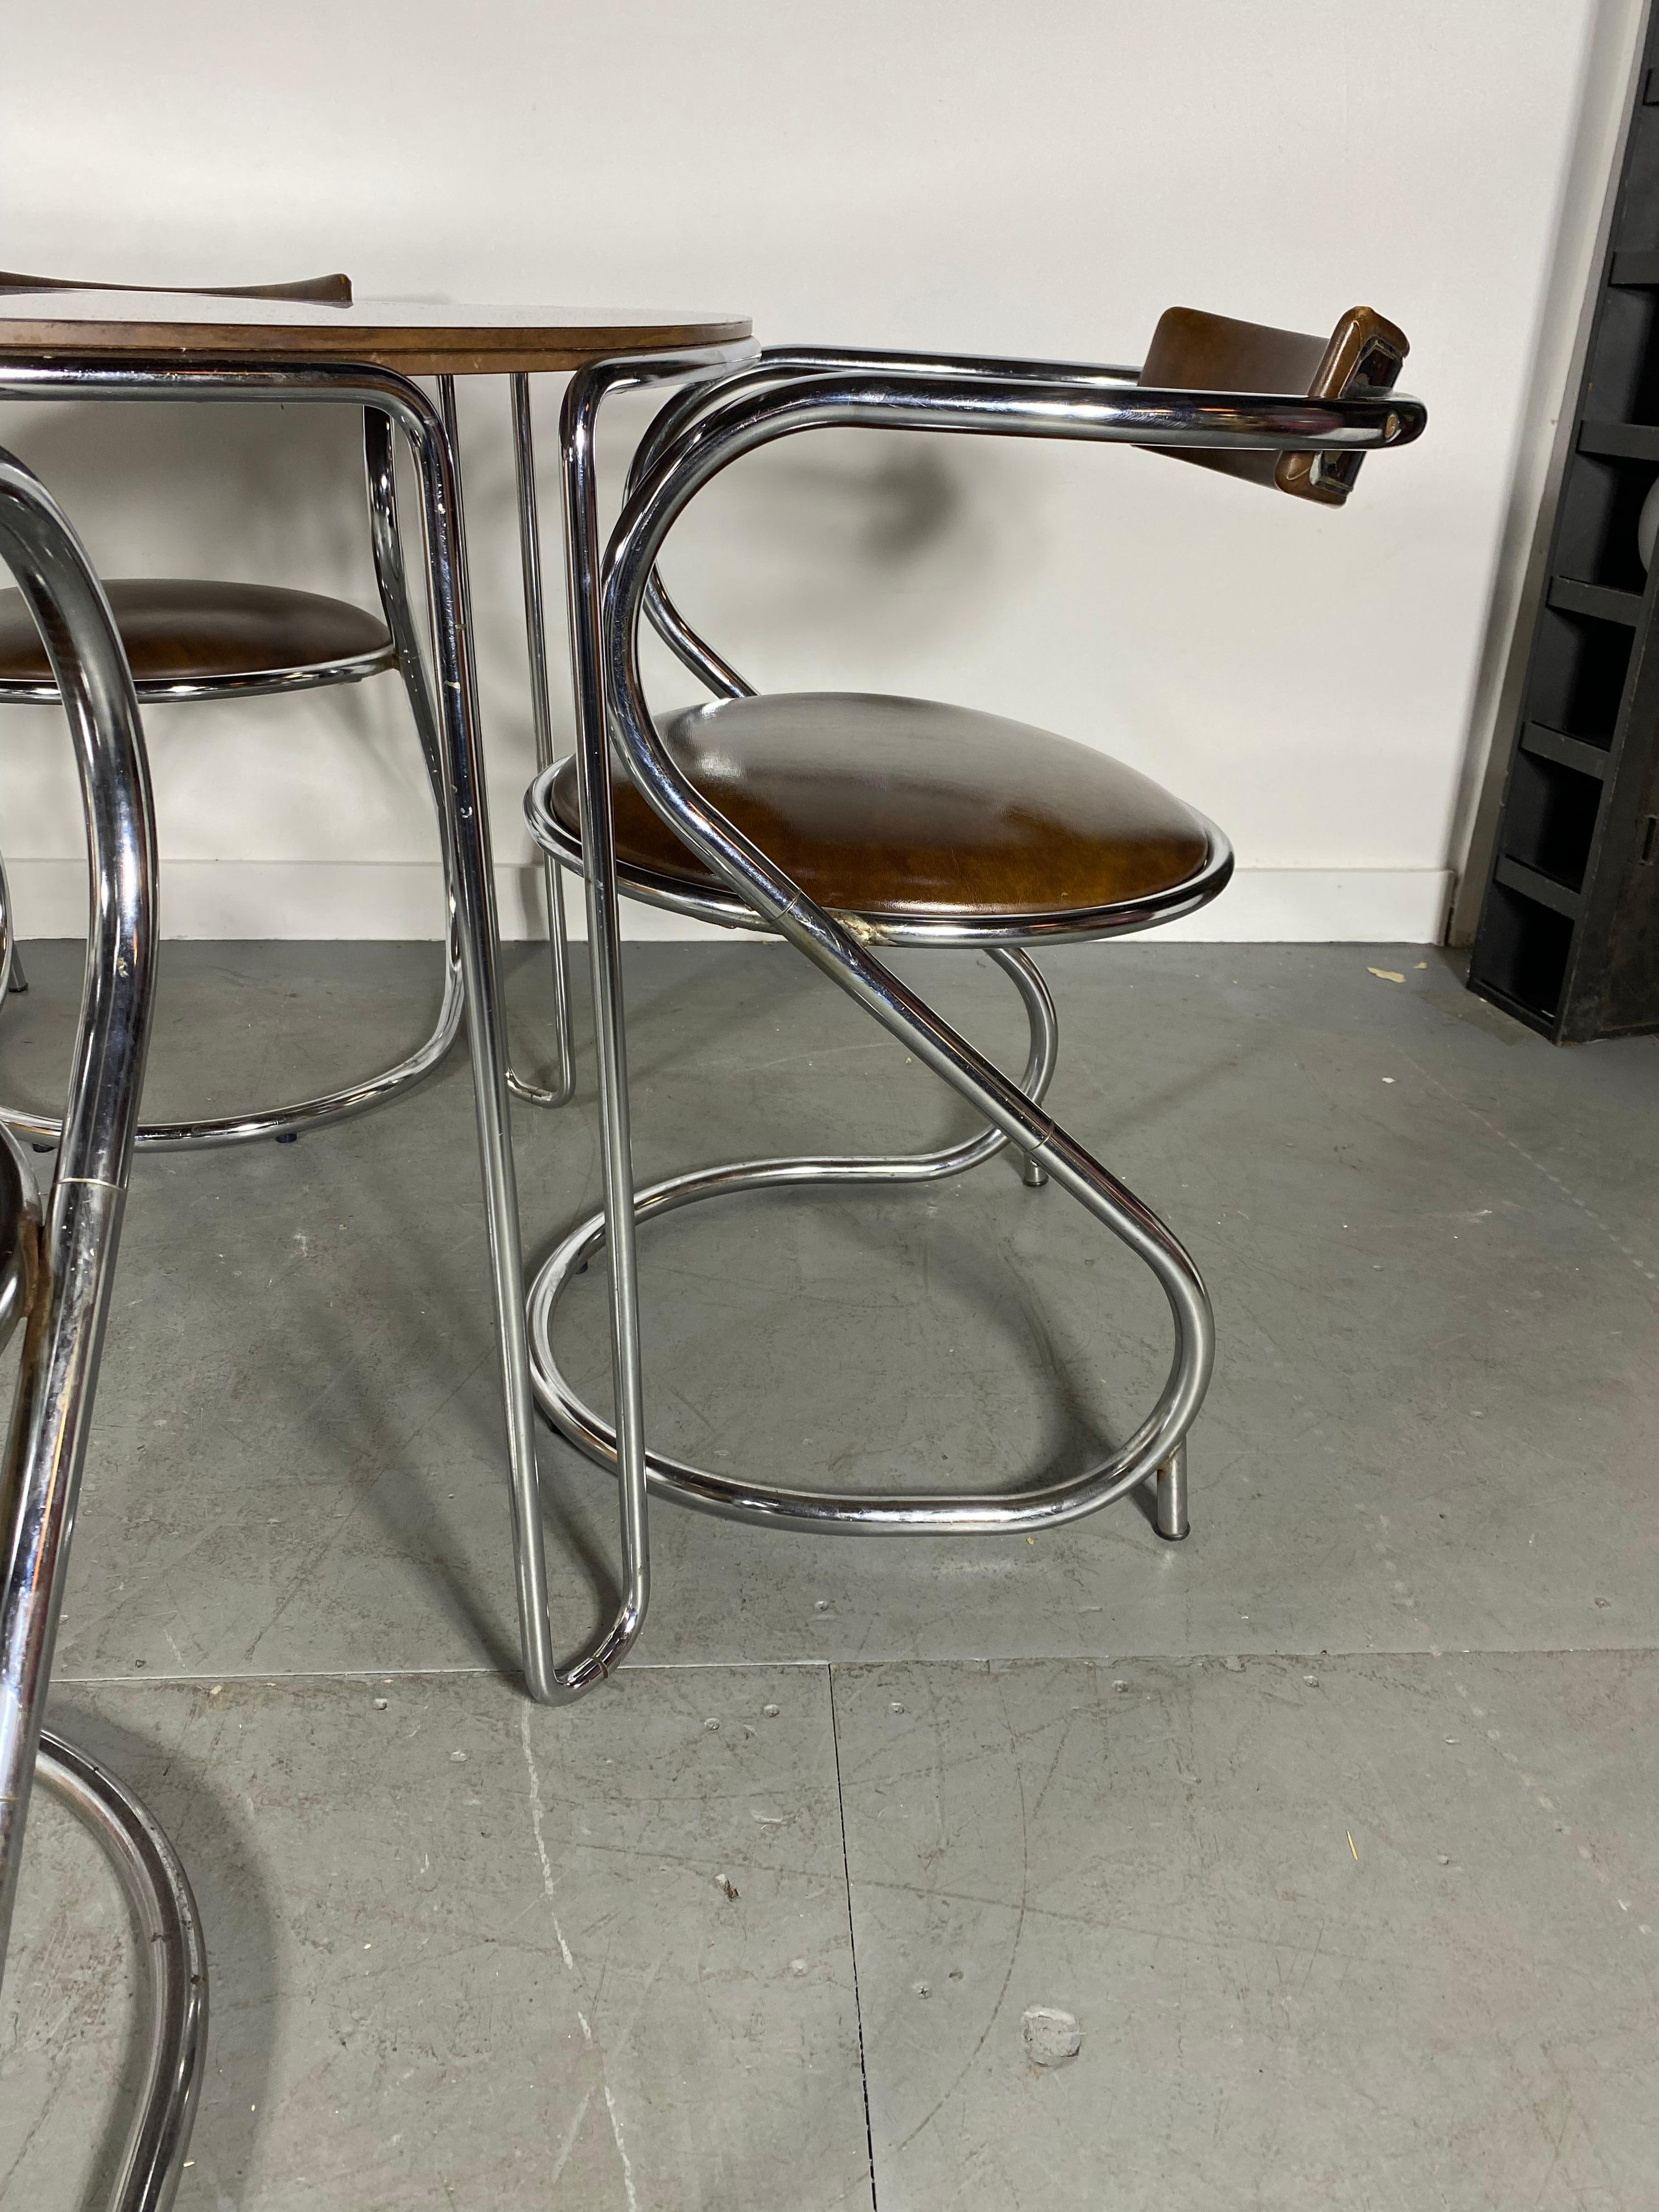 Stunning Set of 4 Modernist Chrome Cantilever Chairs by Etowah Mfg, Bauhaus / Art Deco,, Super stylize d. Amazing original condition. Extremely comfortable. Superior quality and construction.Listing for CHAIRS ONLY. Please see additional listing for